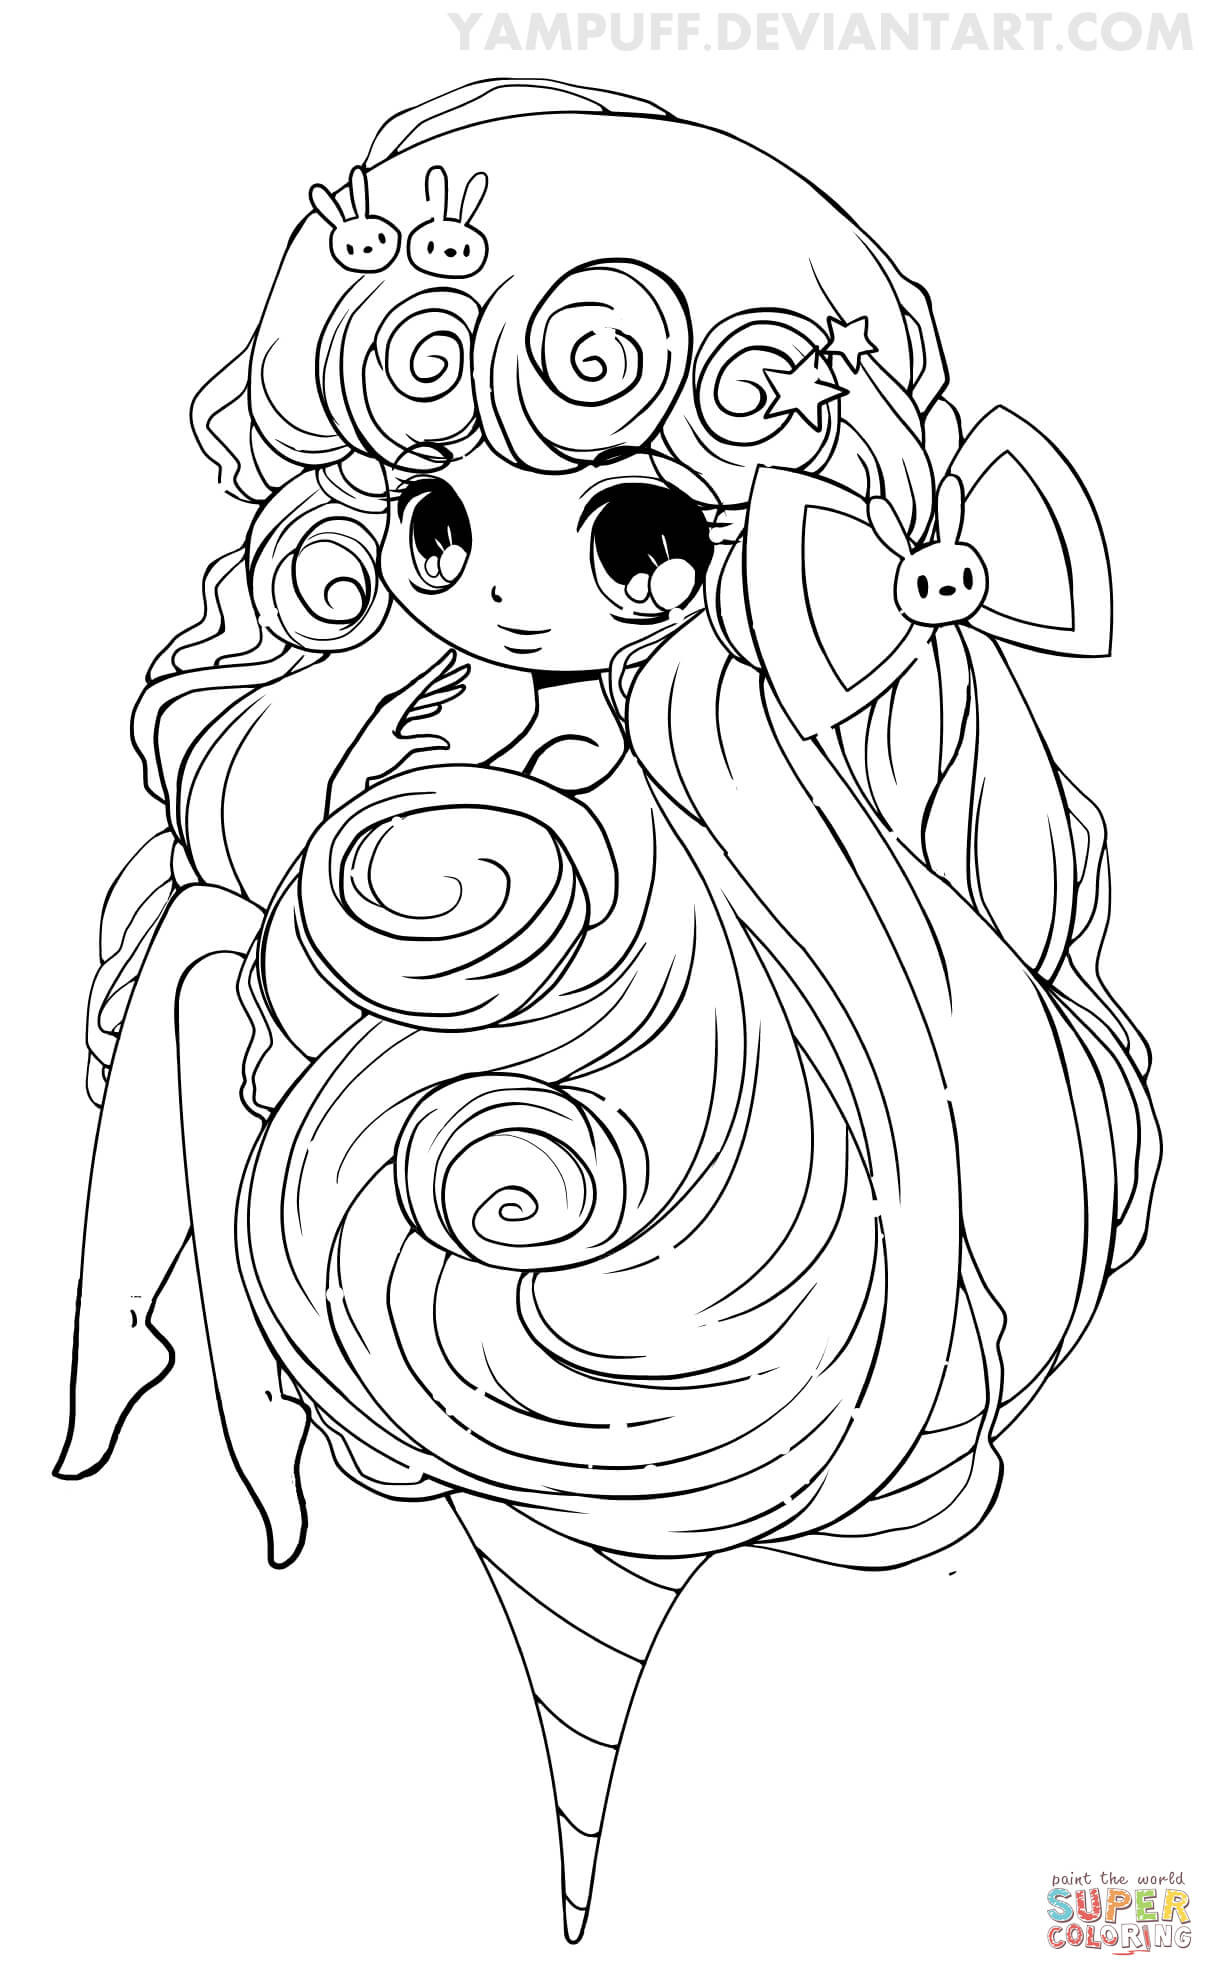 Chibi Coloring Pages Girl
 Chibi Cotton Candy Girl coloring page